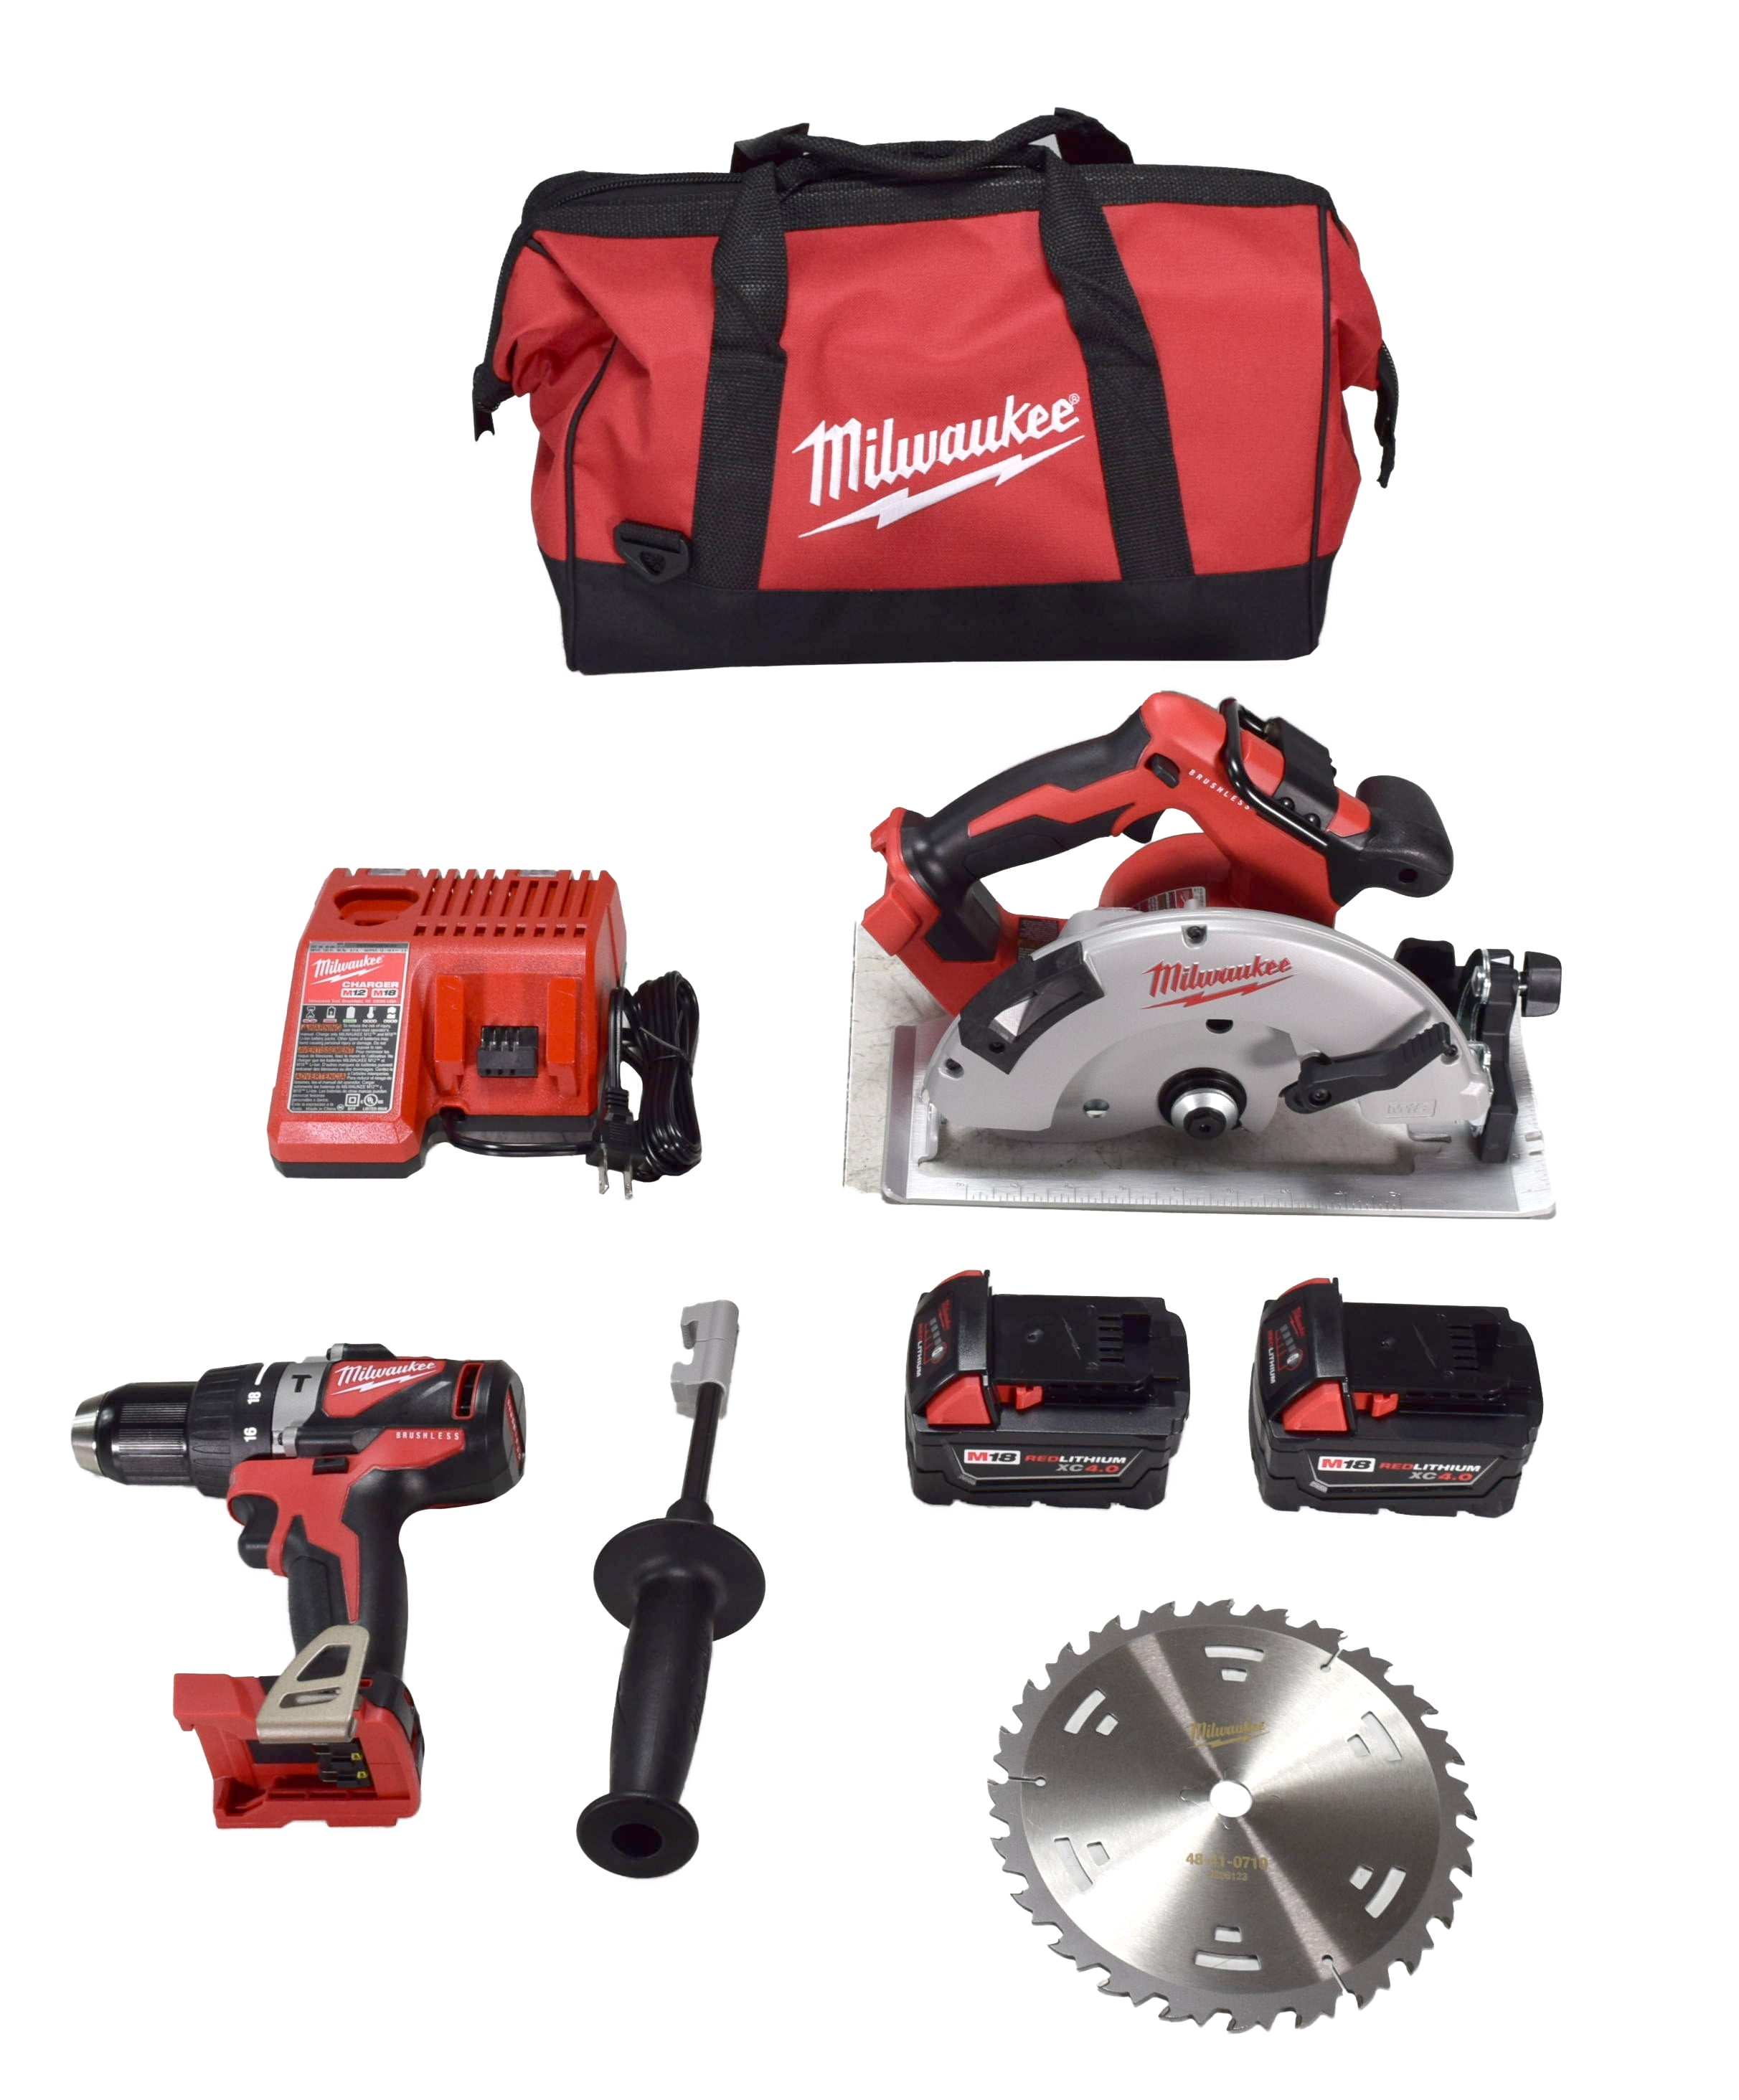 Details about   Milwaukee 2992-22 BRUSHLESS 2TOOL COMBO KIT LN 